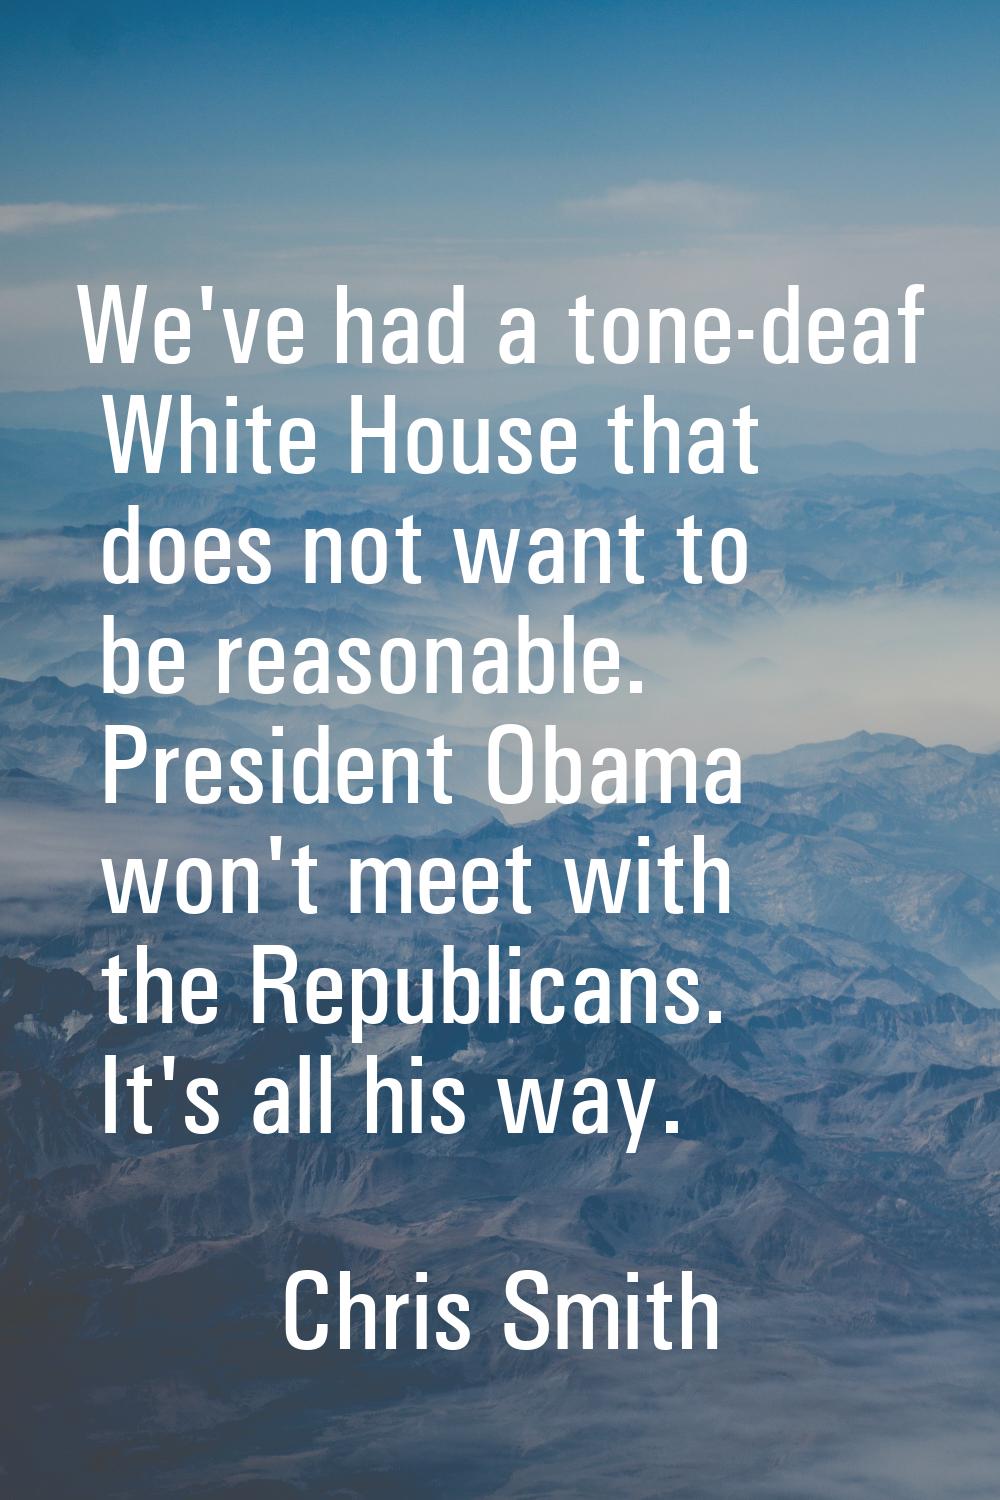 We've had a tone-deaf White House that does not want to be reasonable. President Obama won't meet w